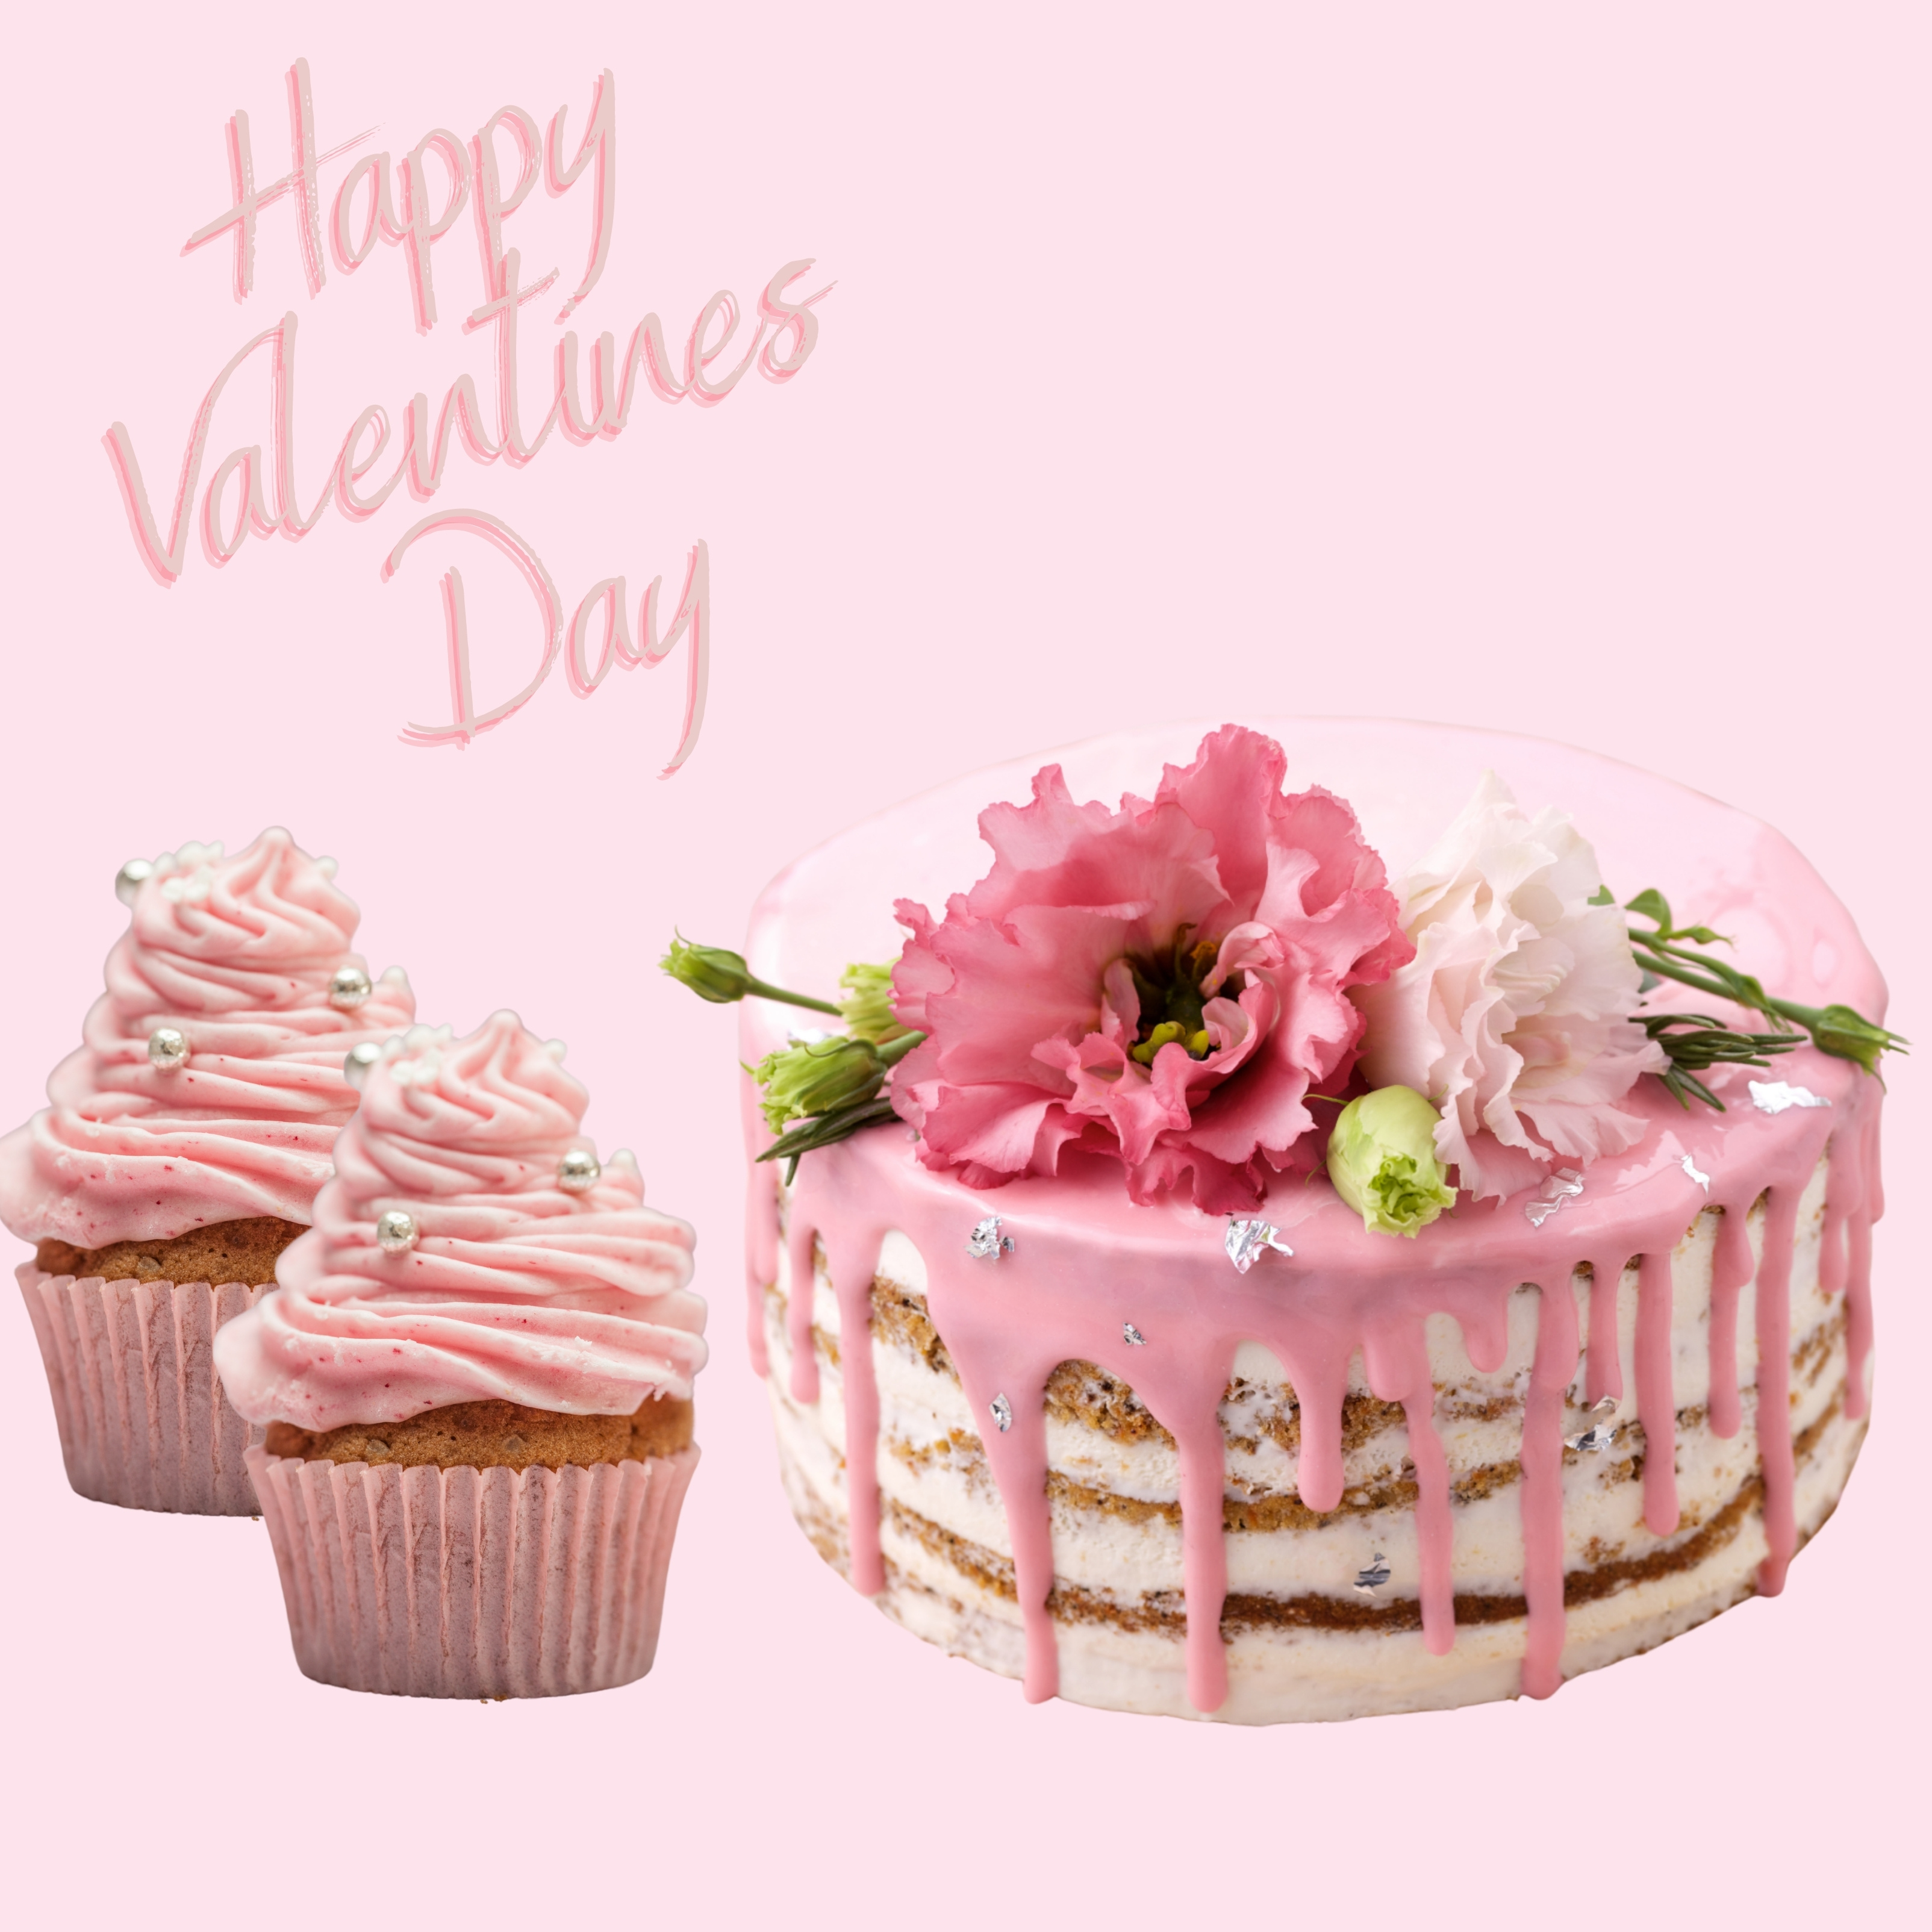 iPad Wallpapers Happy Valentines Day Cake Flower Pink Background iPad Wallpaper 3208x3208 px